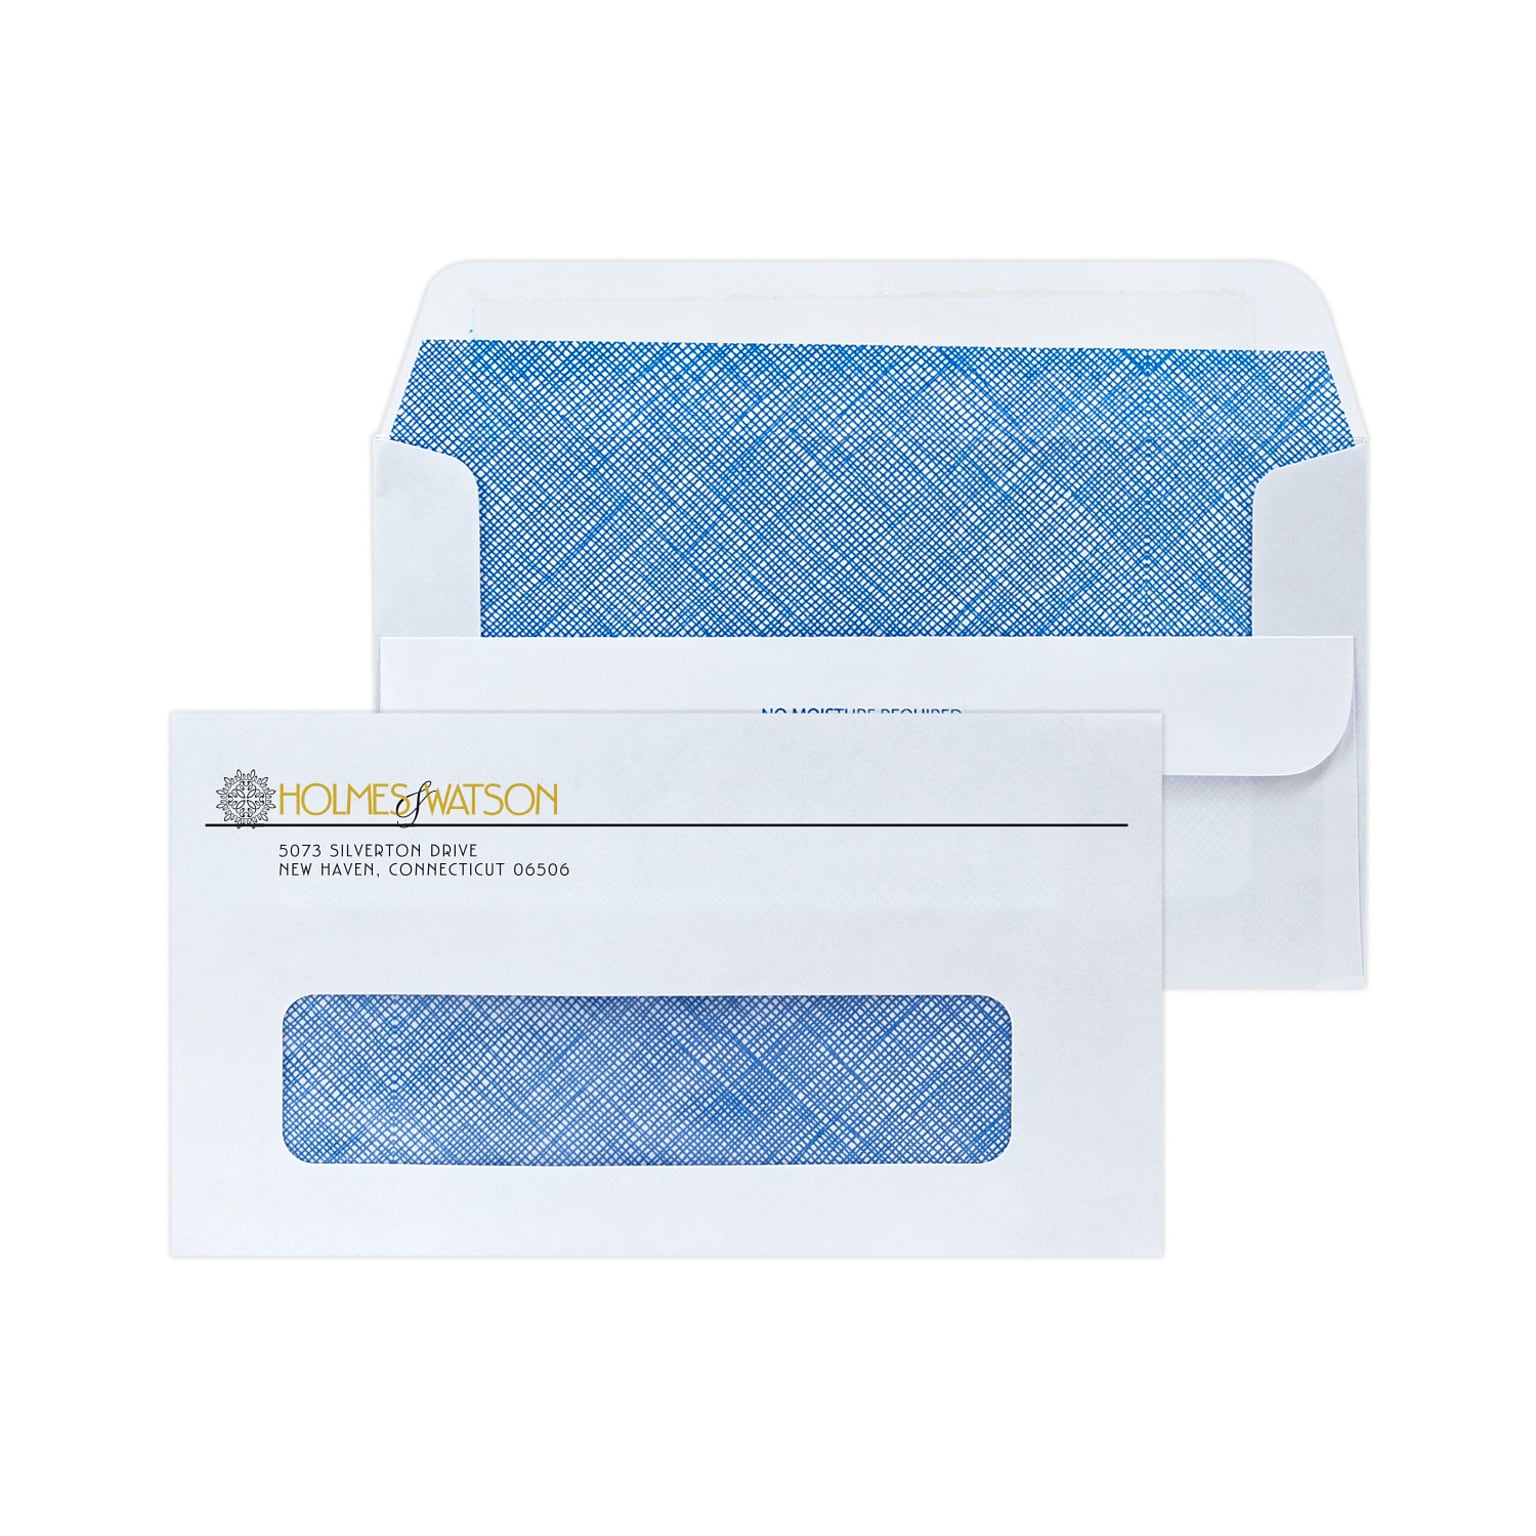 Custom #6-3/4 Self Seal Window Envelopes with Security Tint, 3 5/8x6 1/2, 24# White Wove, 1 Std and 1 Custom Inks, 250/Pack